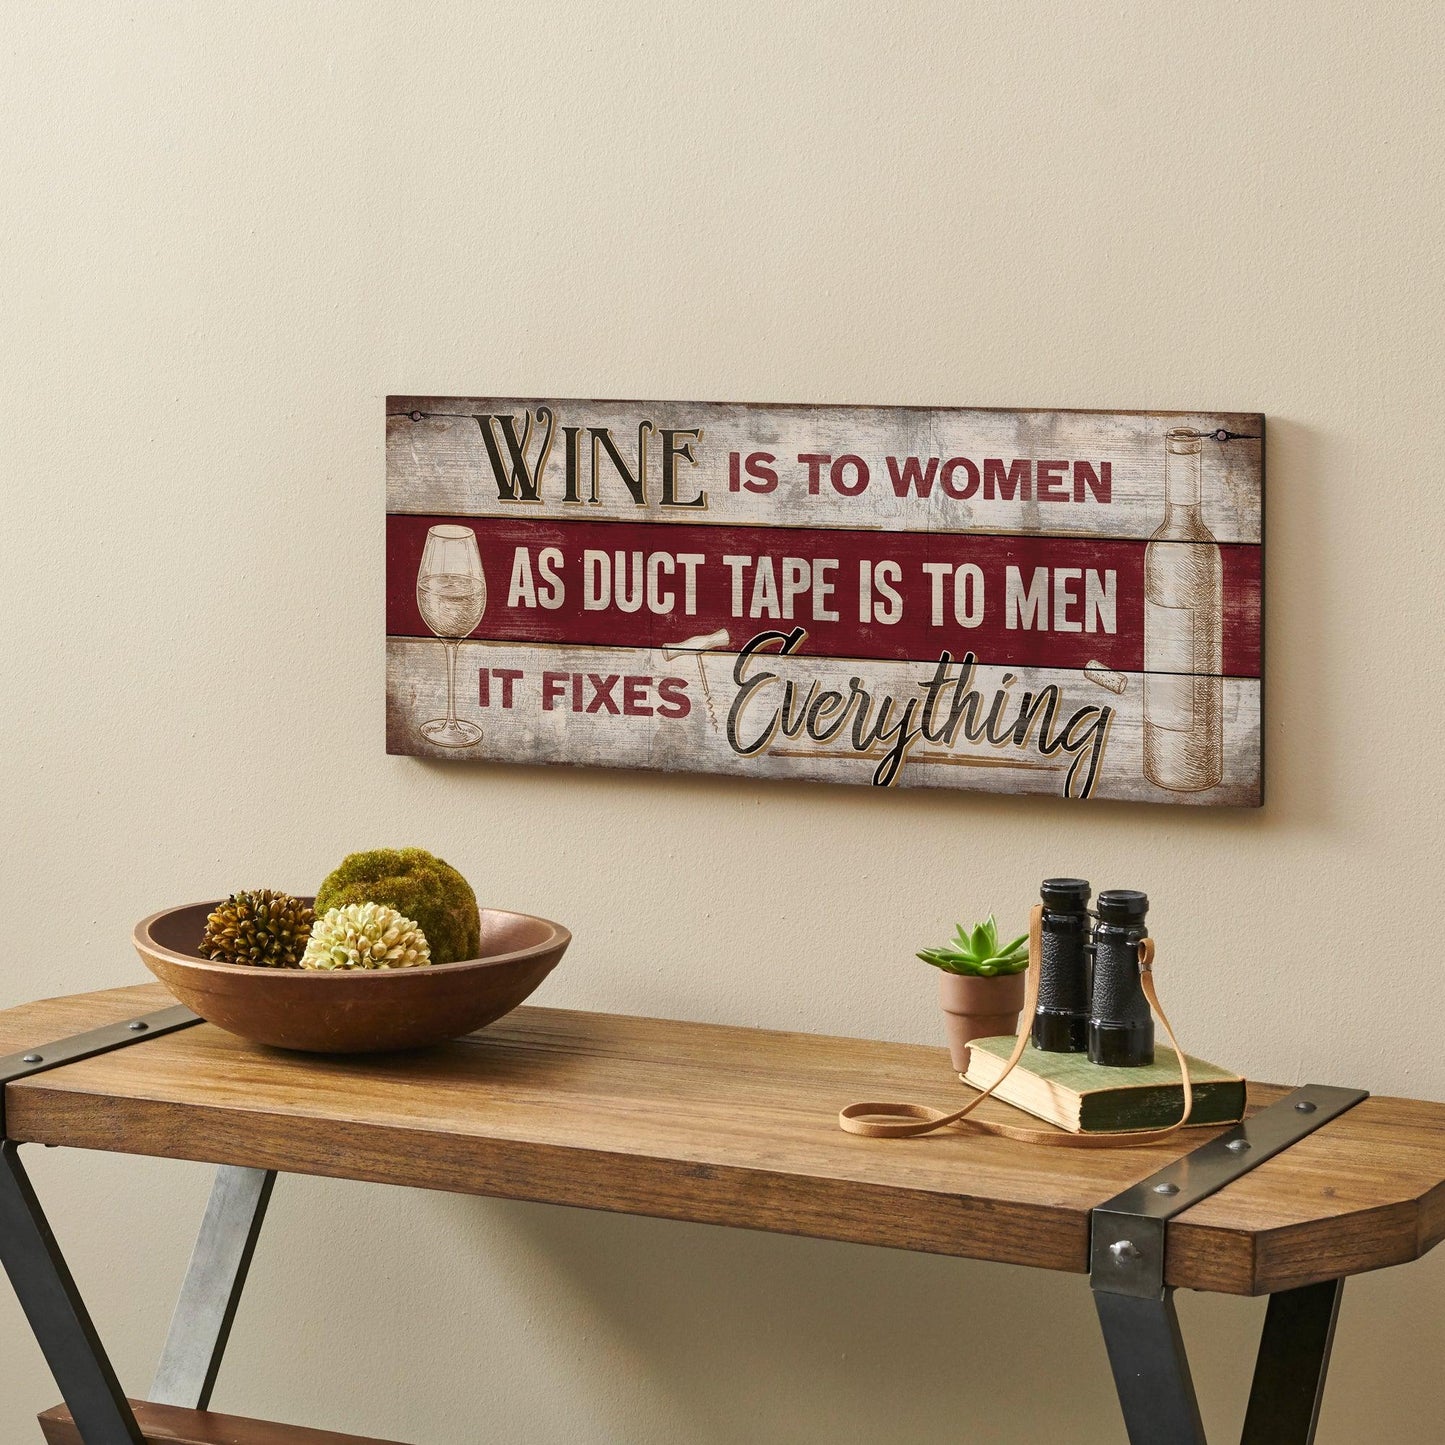 Wine Fixes Everything 12" x 30" Wood Sign - Wild Wings